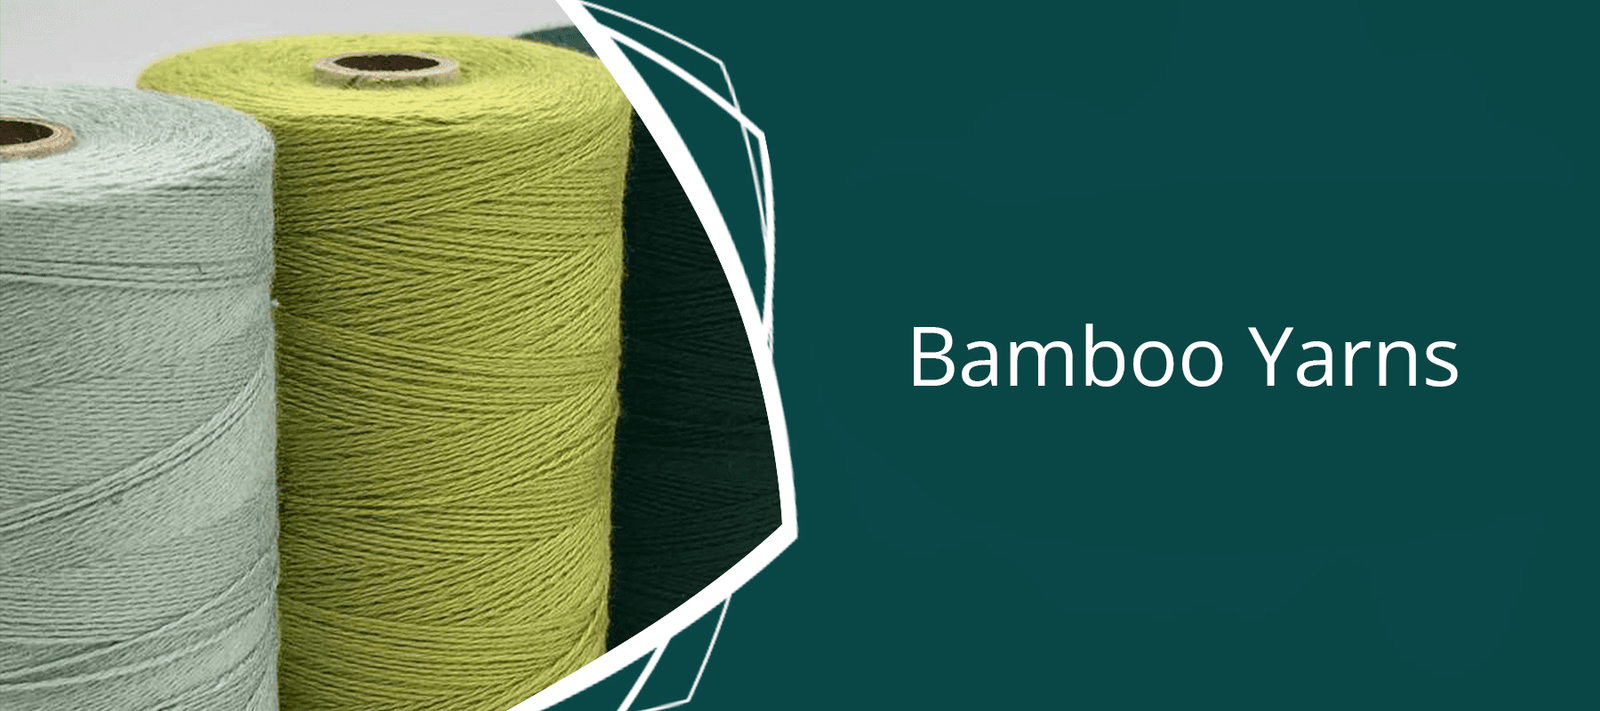 Bamboo Boucle from Maurice Brassard